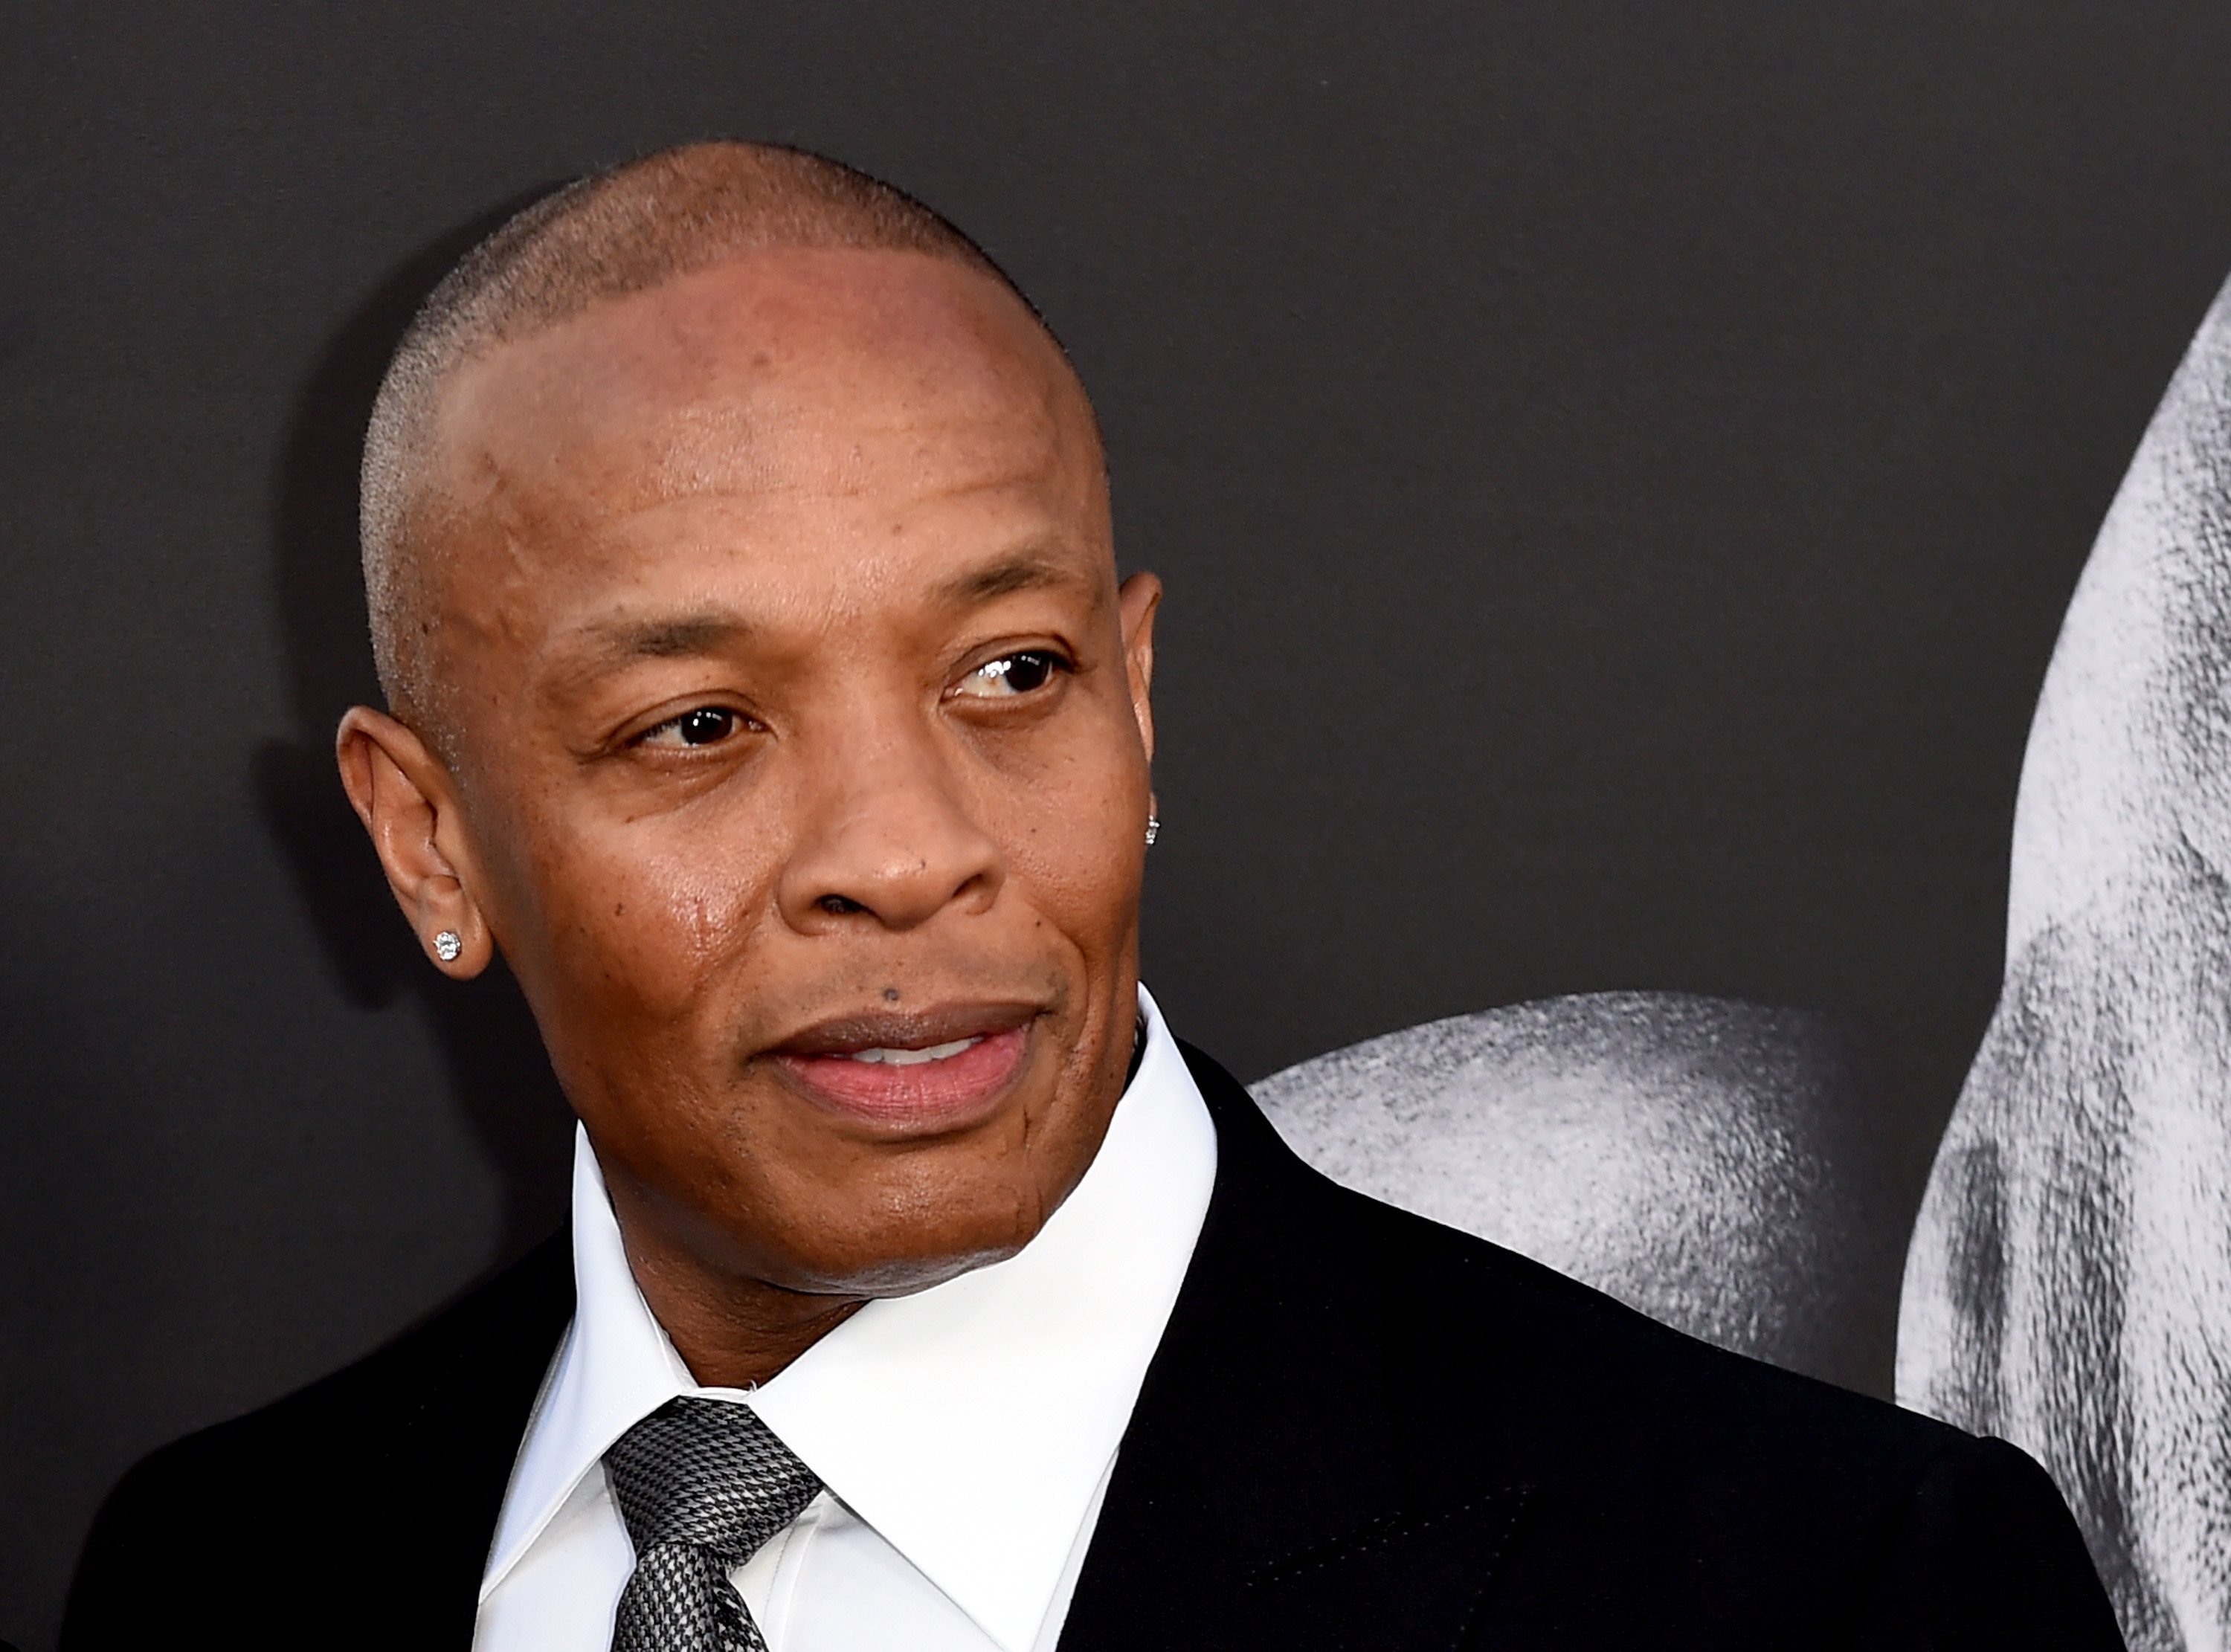  Dr. Dre attends the premiere of "The Defiant Ones" at Paramount Theatre on June 22, 2017 in Hollywood, California | Photo: Getty Images